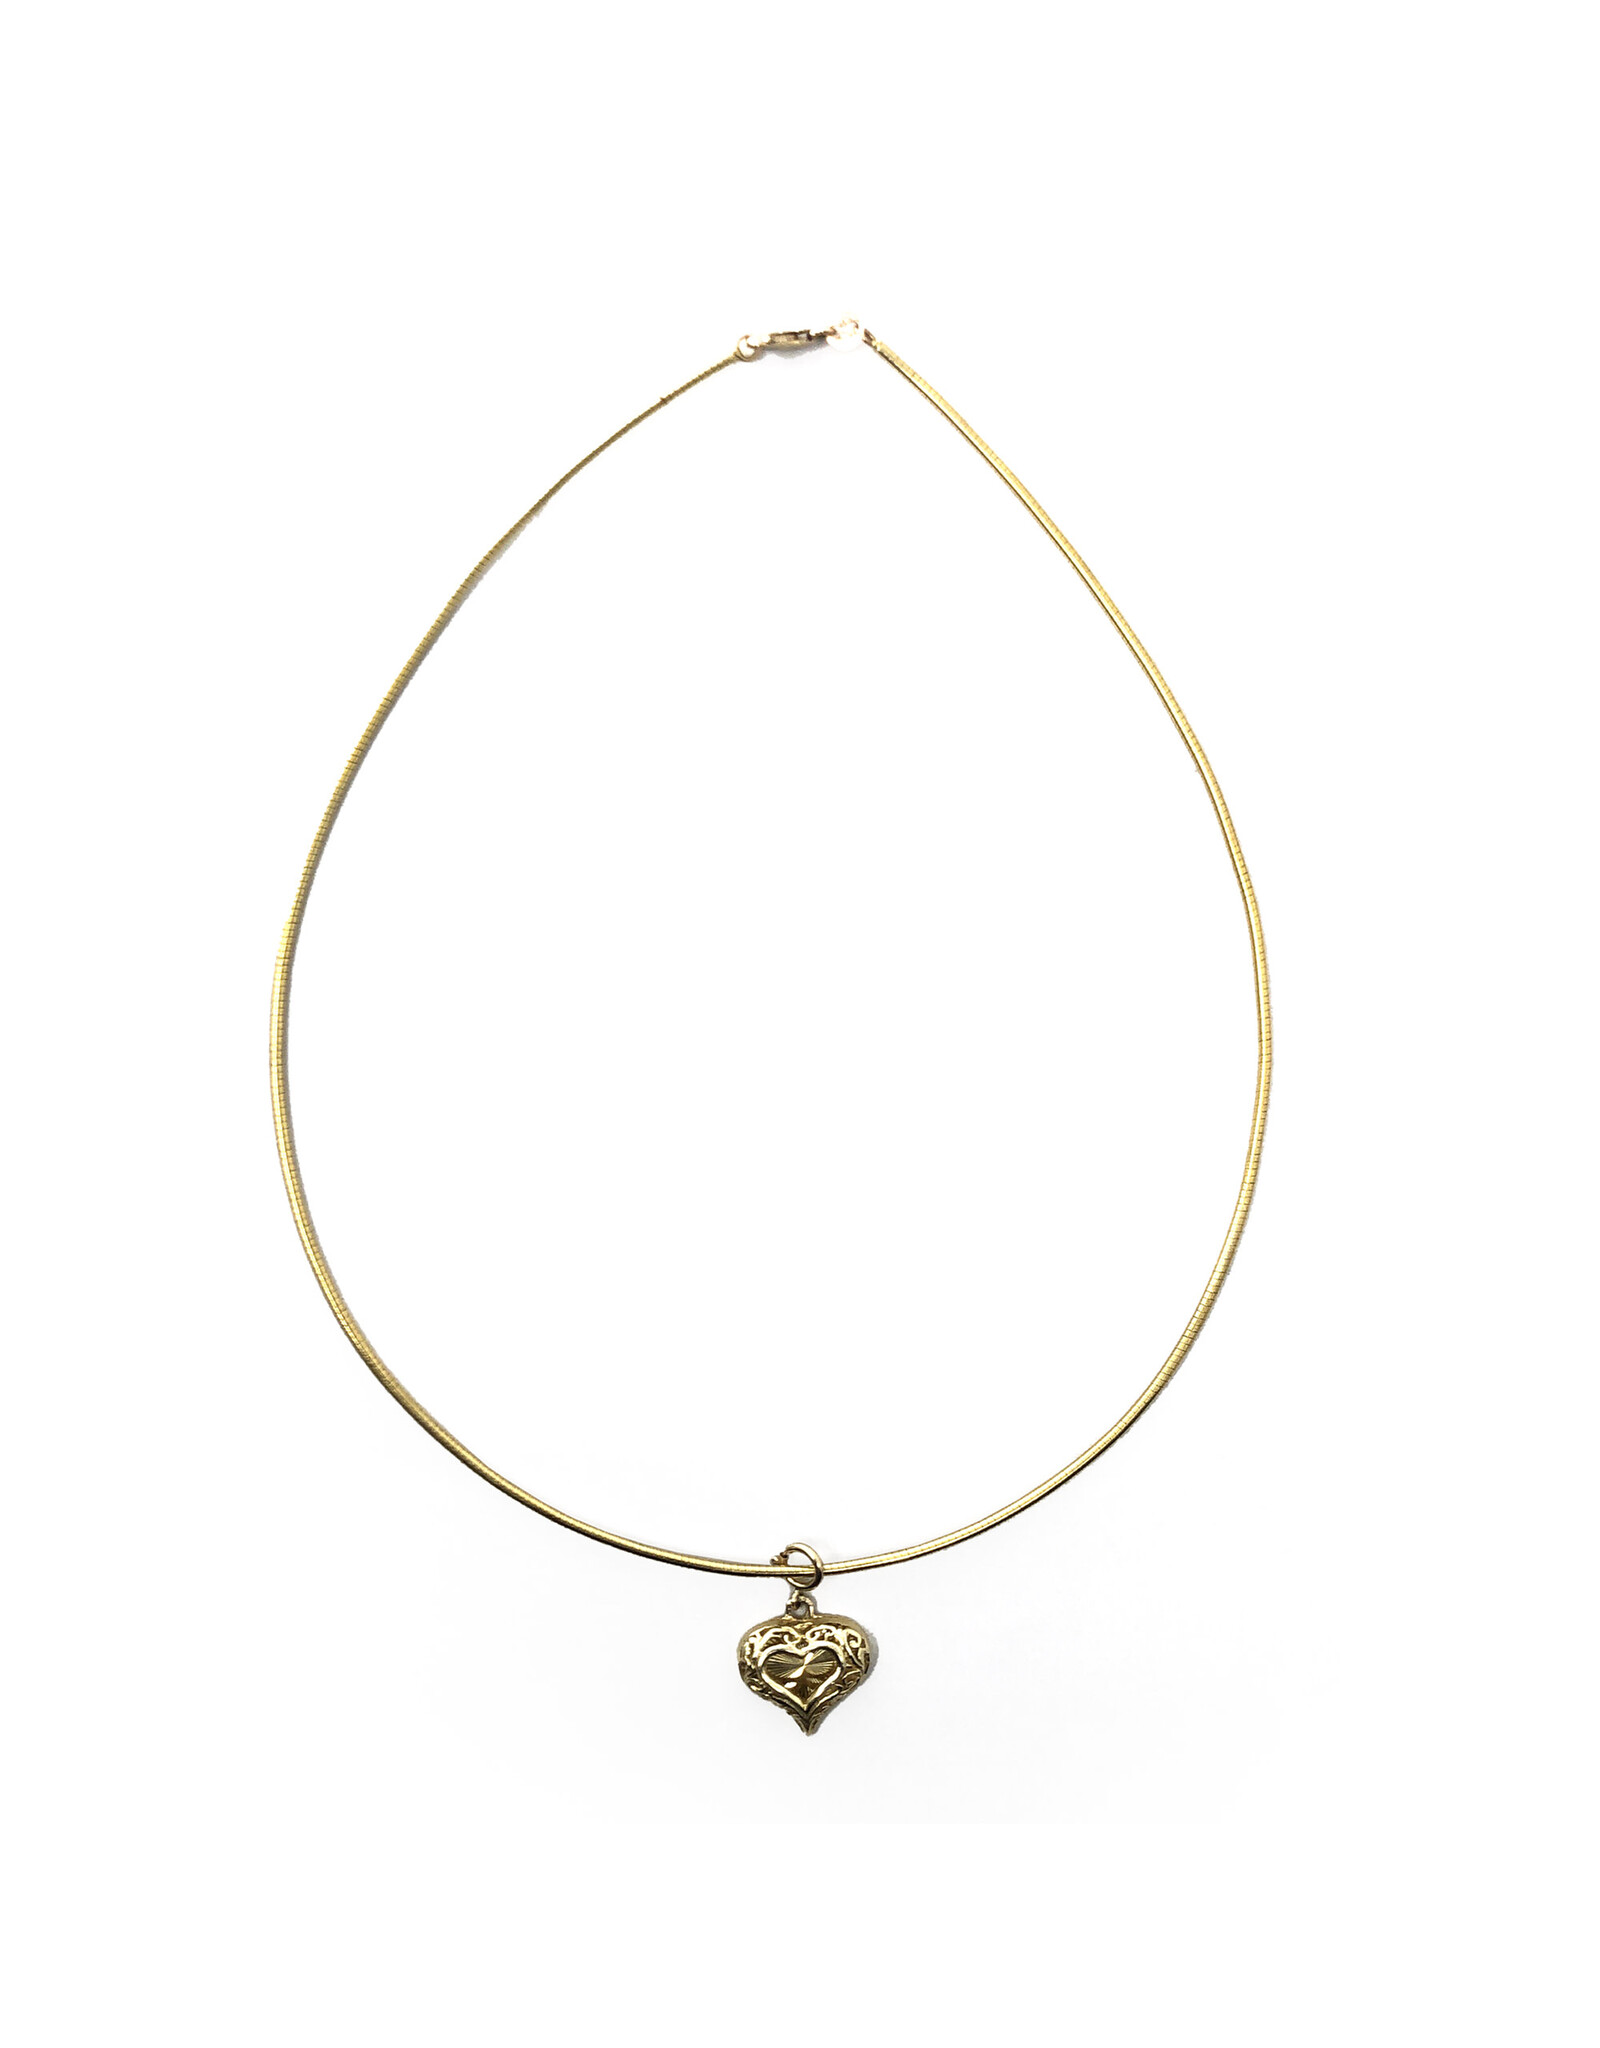 14K Gold Round Snake Chain with 14K Gold Heart Charm Pendant